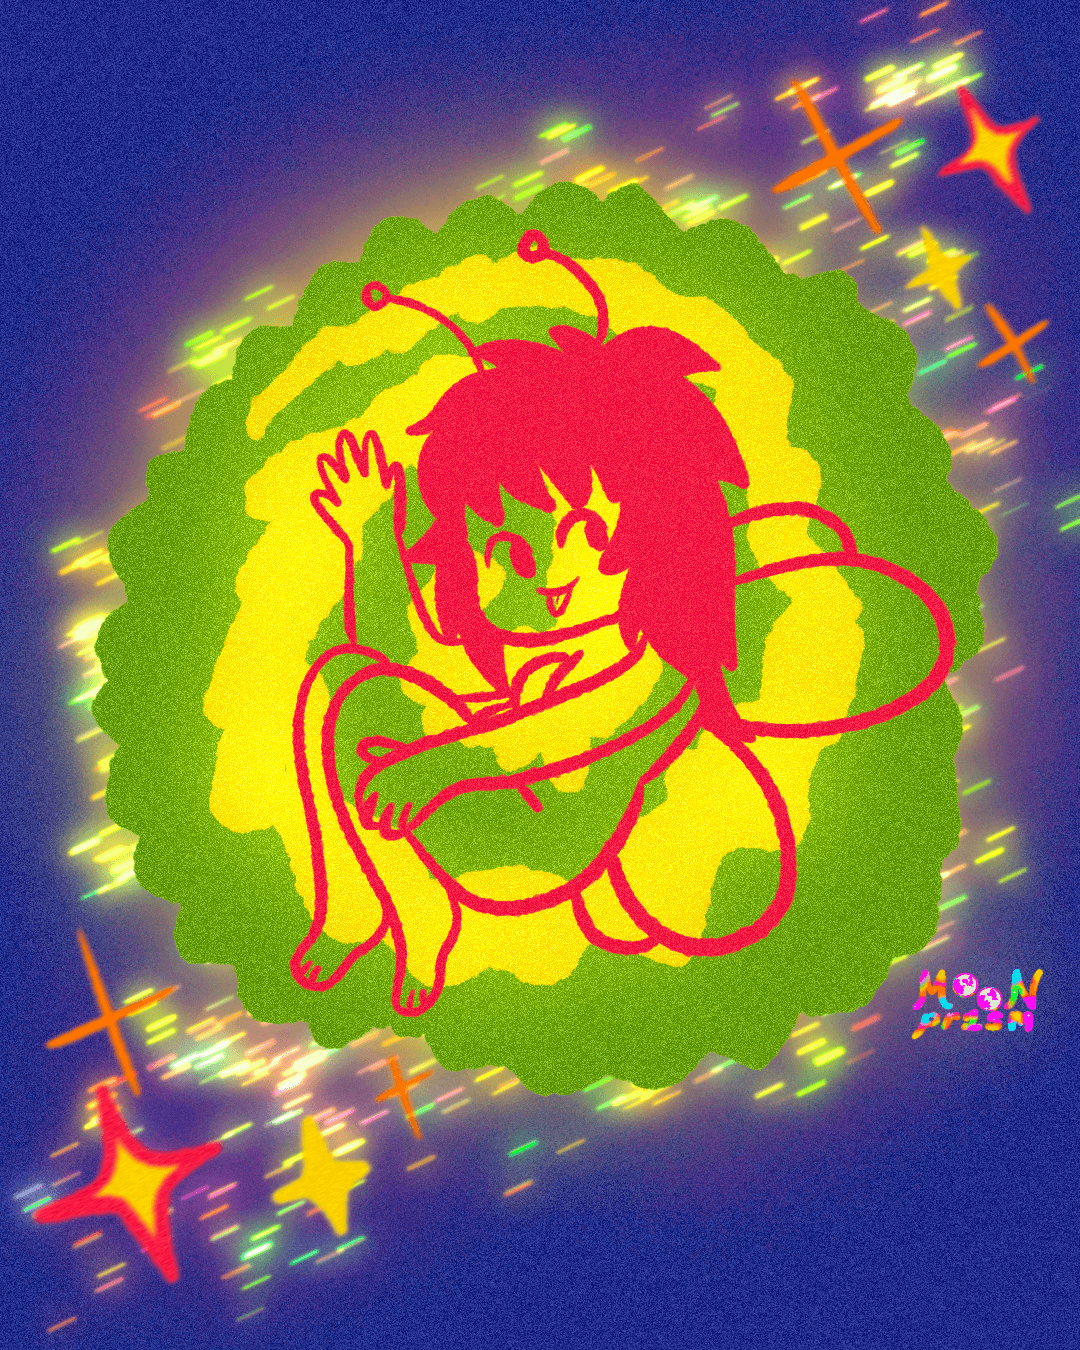 An illustration depicting a little cartoon faerie with shaggy long hair and a mischievous expression on a swirling green and yellow, glittering orb on a blue background.